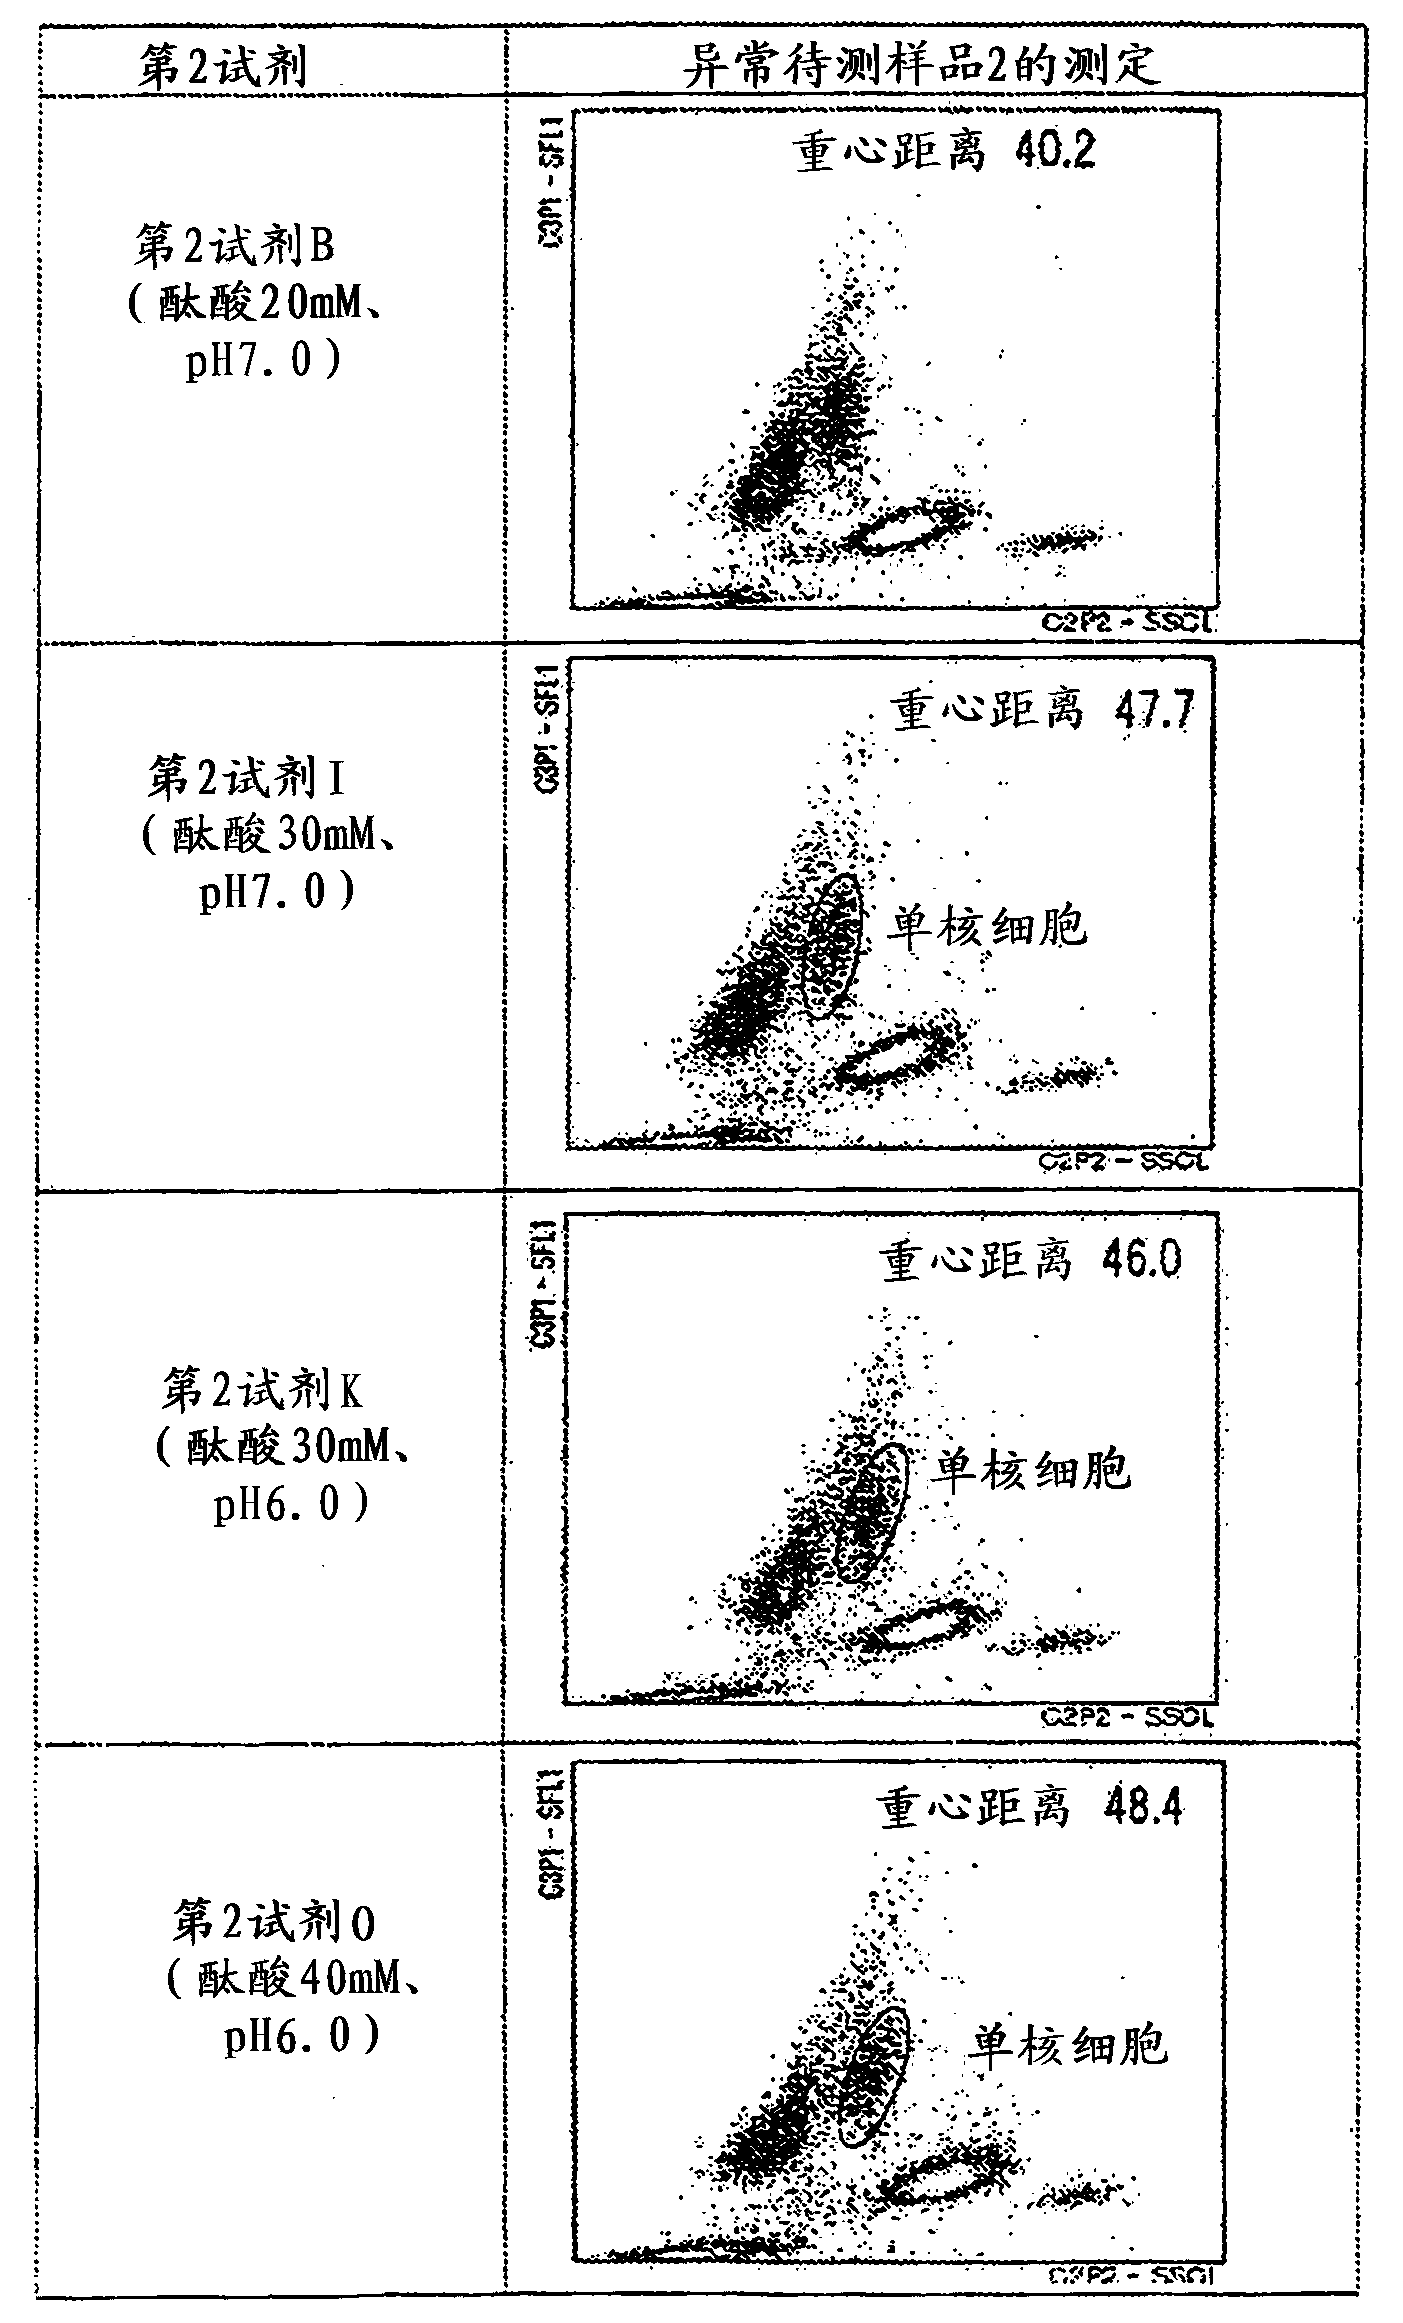 Method for classifying/counting leukocytes, reagent kit for classifying leukocytes, and reagent for classifying leukocytes